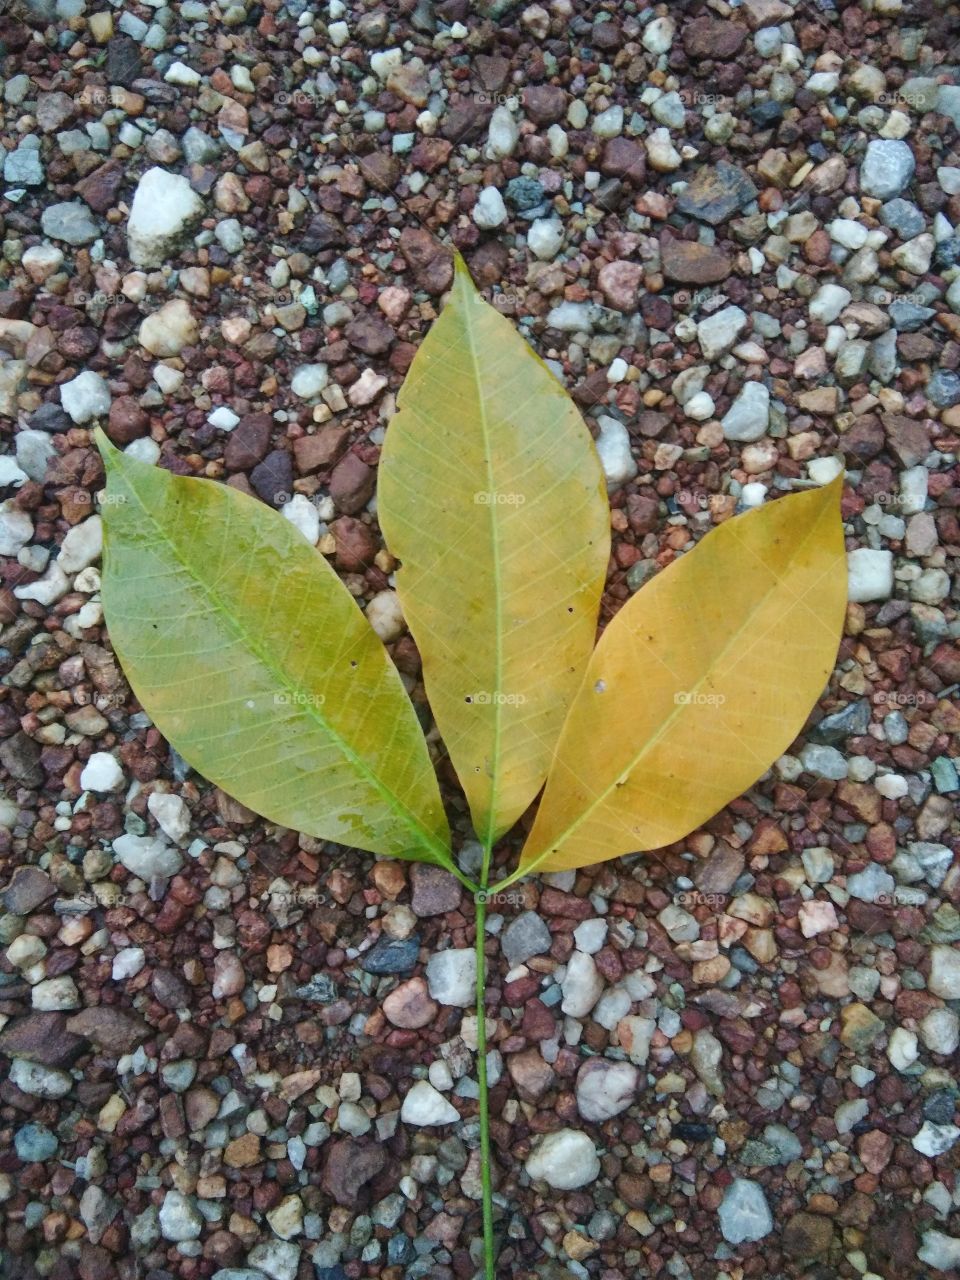 The leaf on the ground after rain